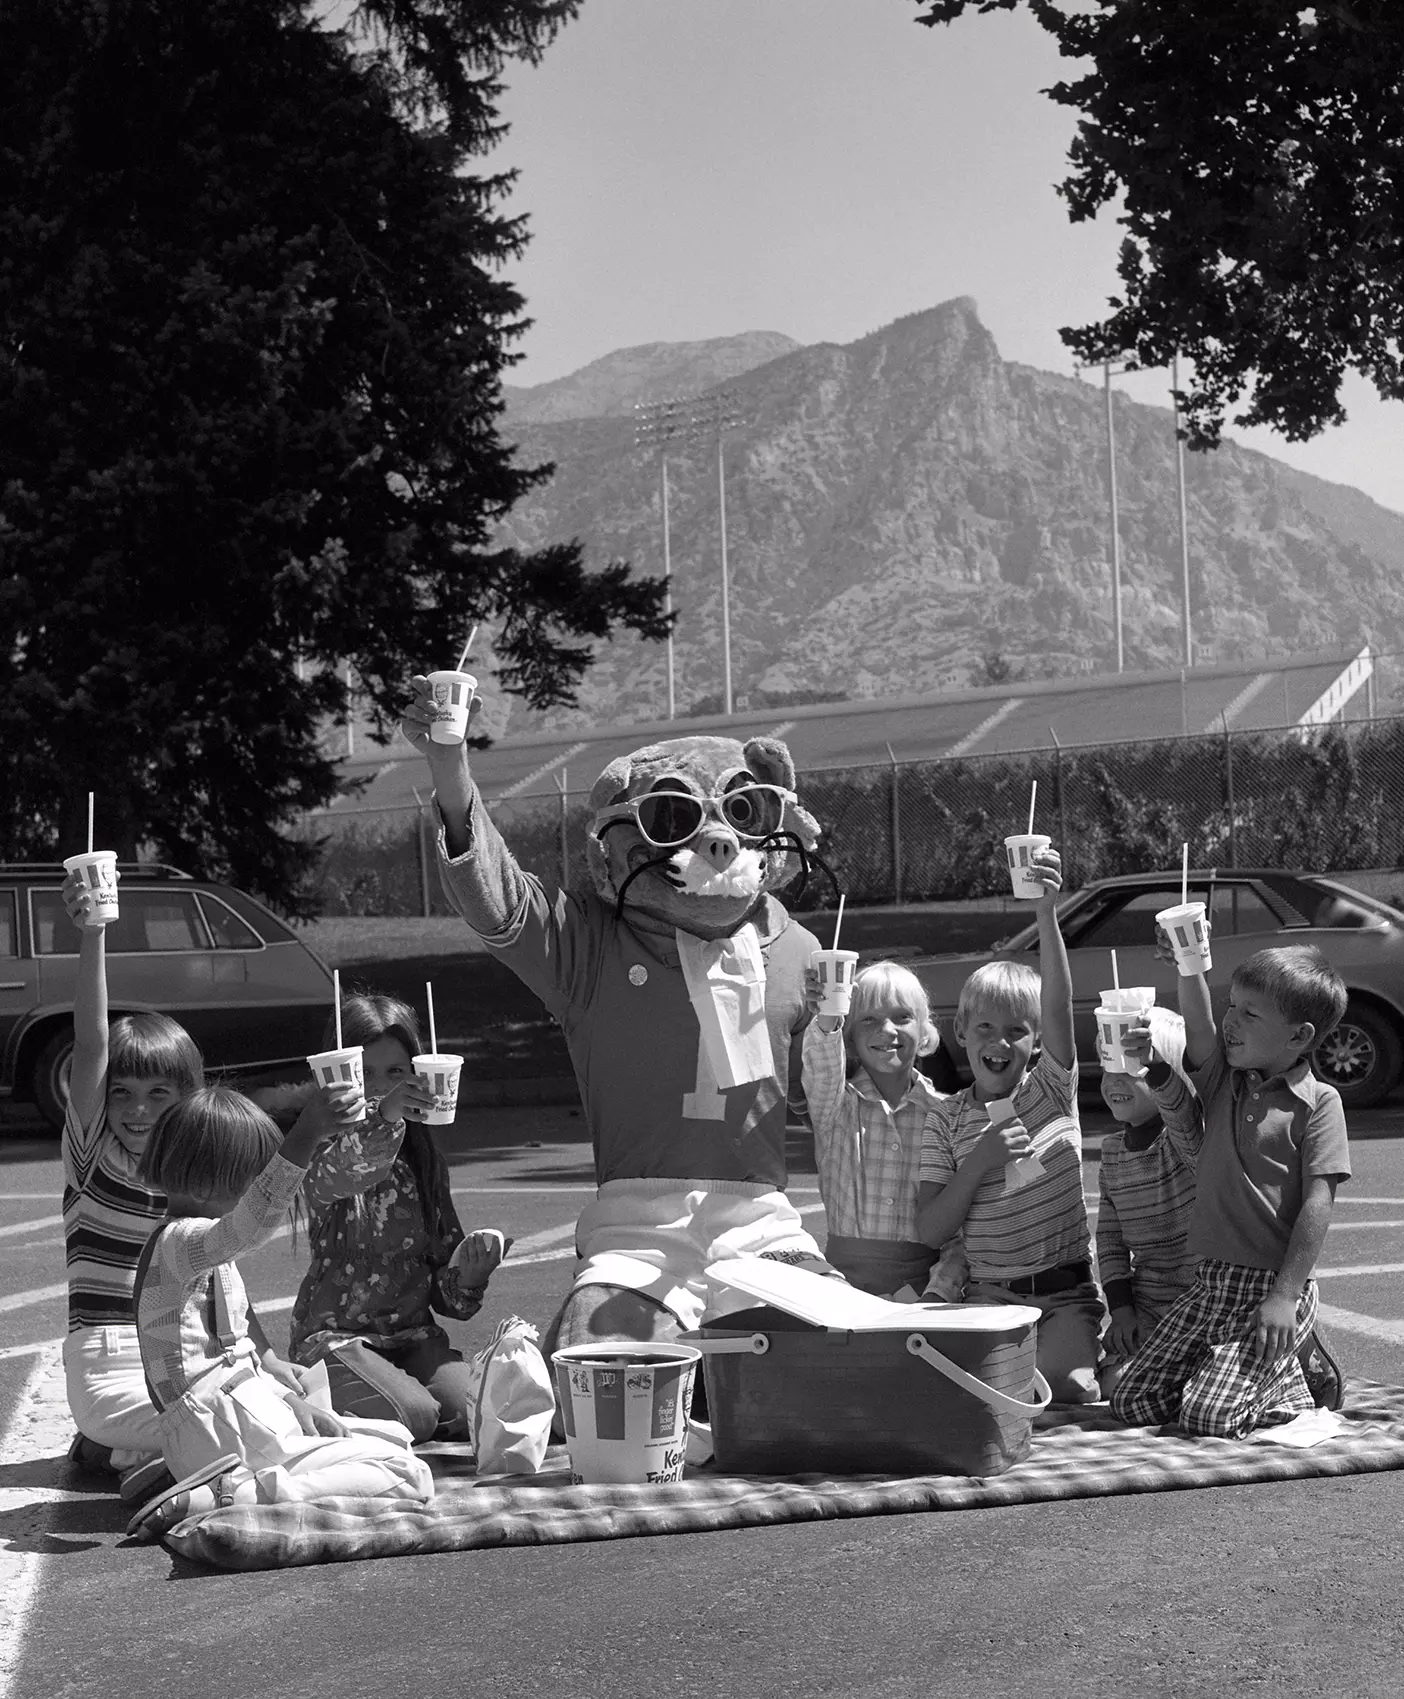 BYU mascot Cosmo the Cougar enjoys a lunch with young friends in 1977.